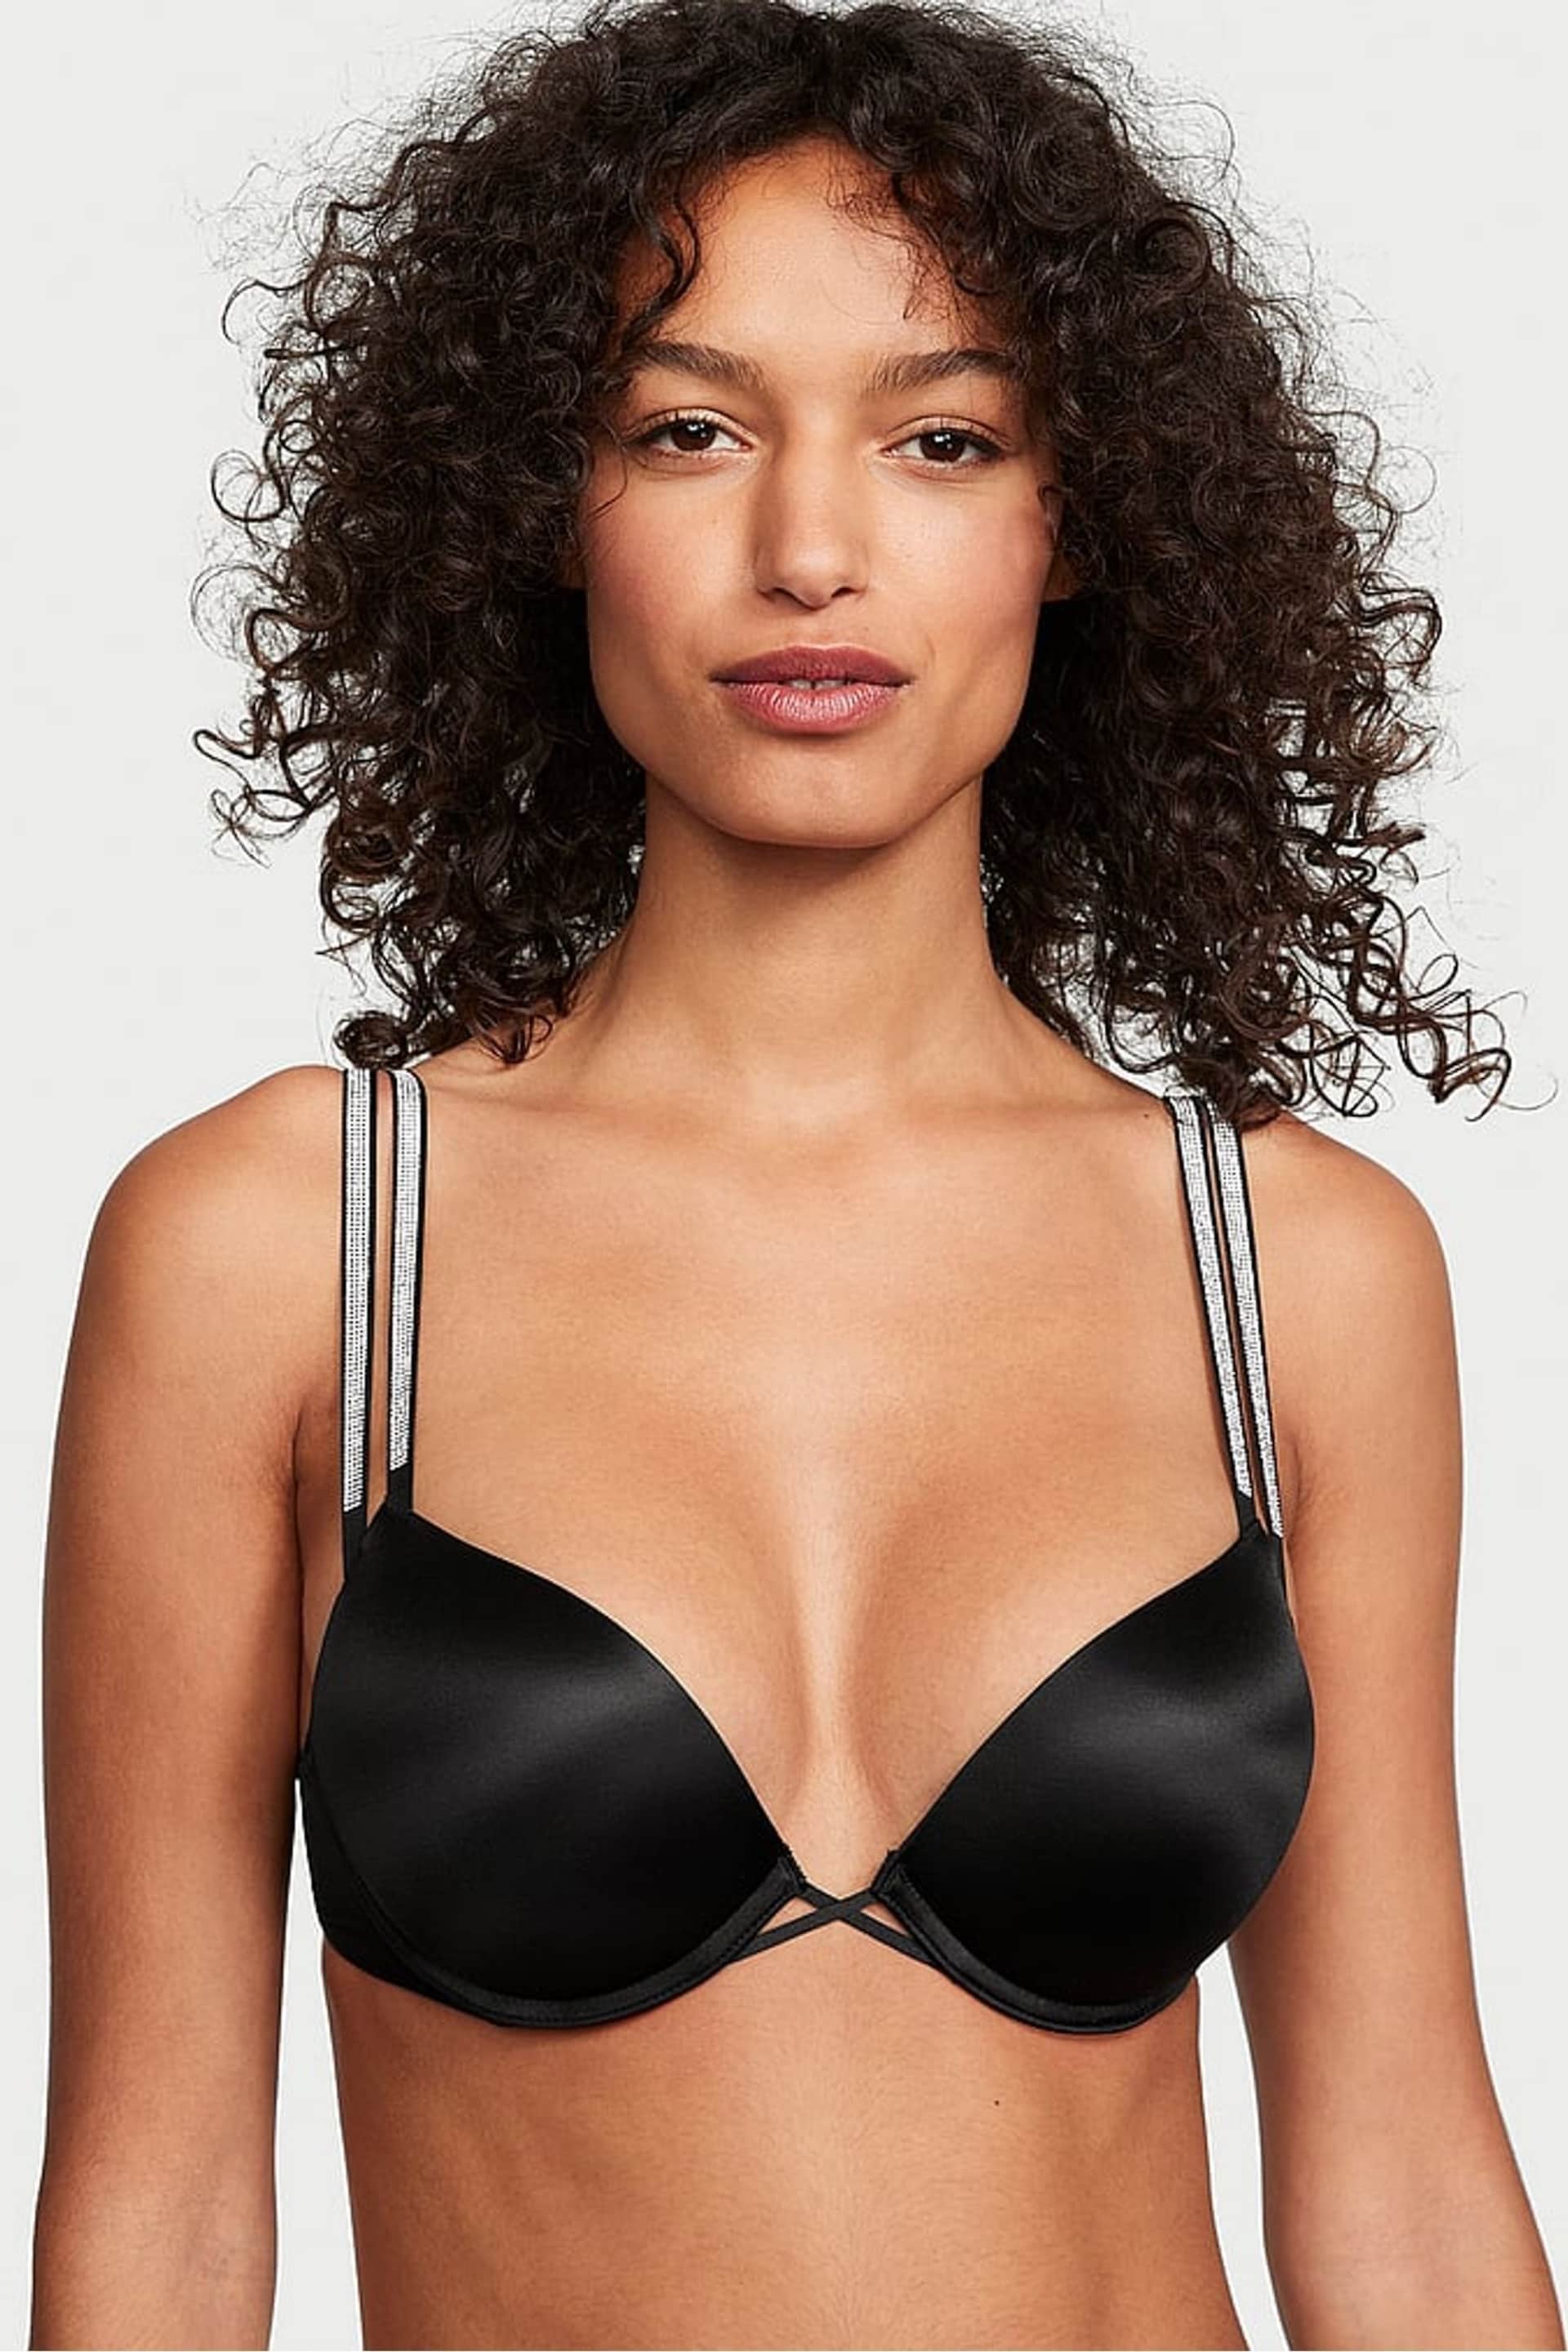 Victoria's Secret Black Add 2 Cups Push Up Double Shine Strap Add 2 Cups Push Up Bombshell Bra - Image 1 of 4